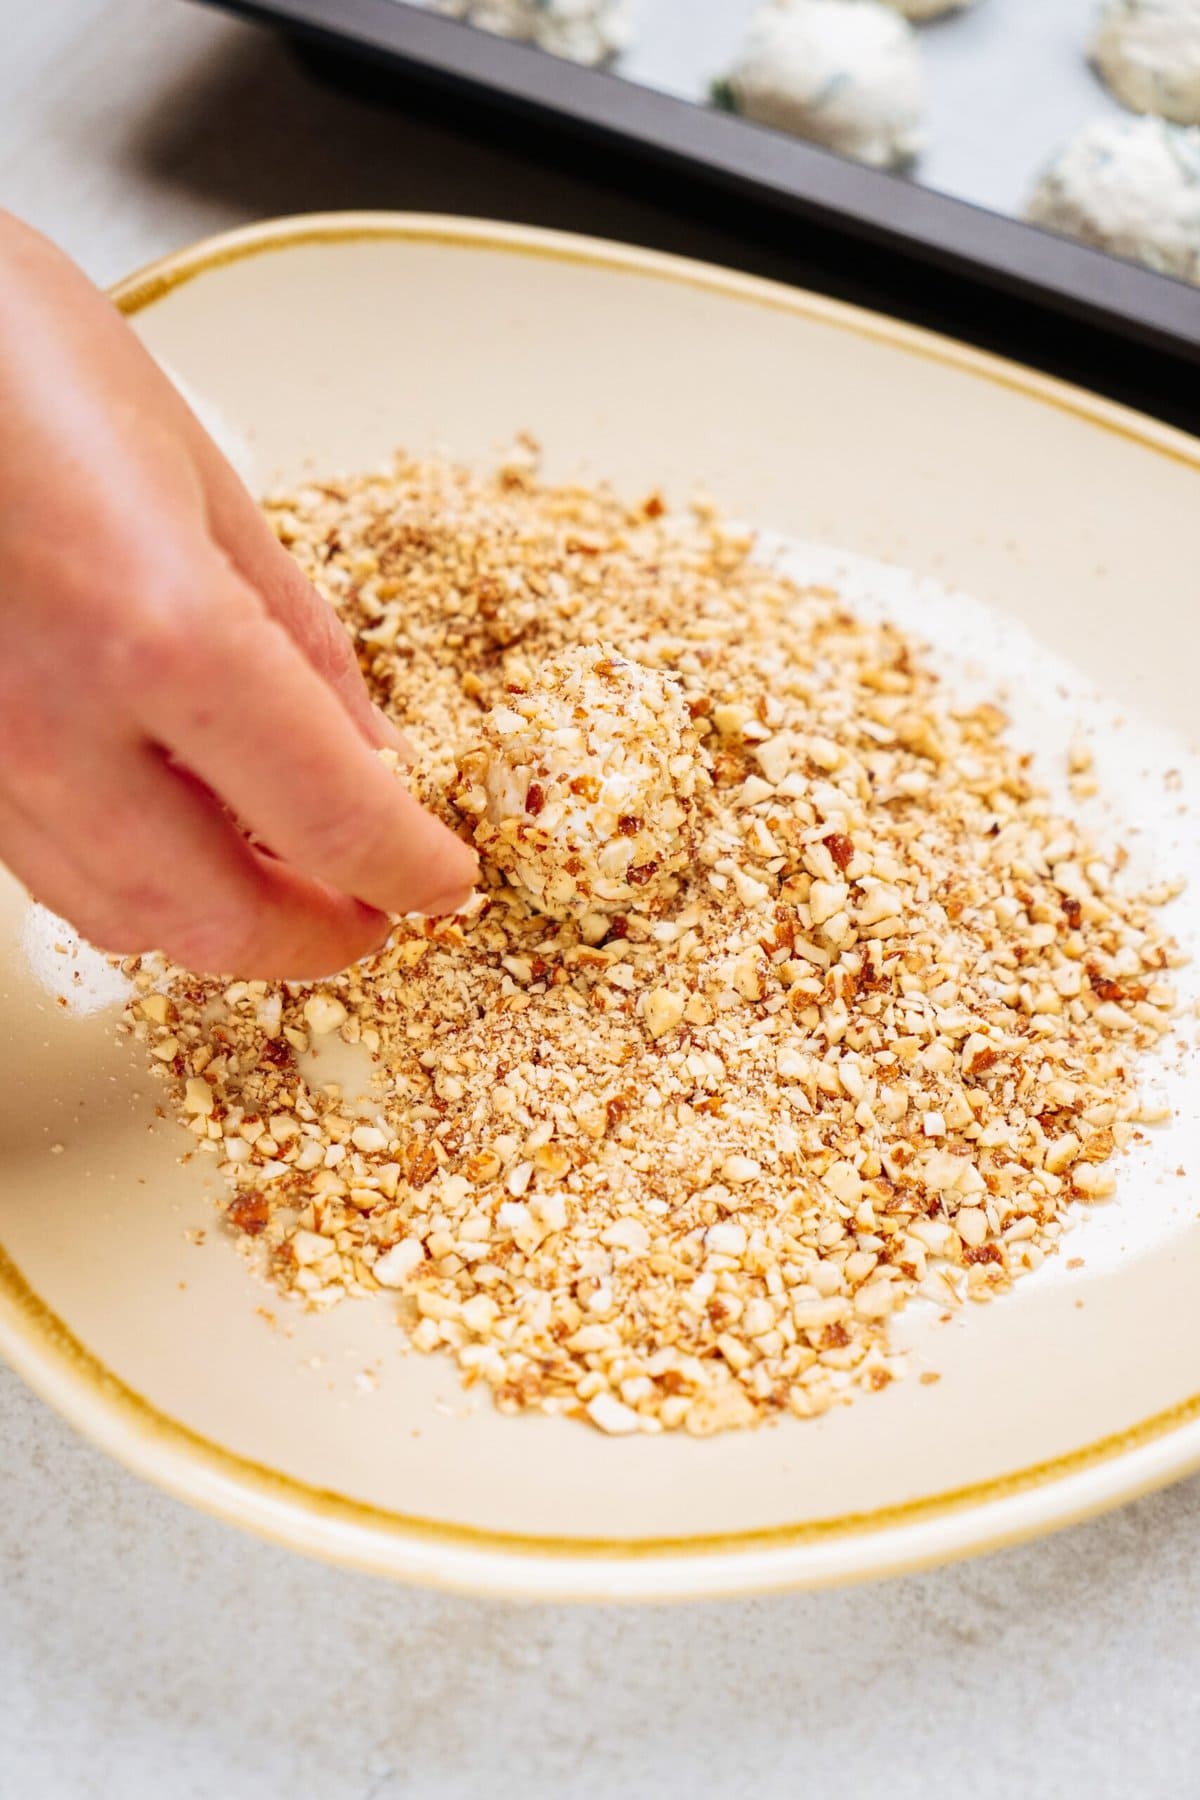 A hand is rolling a round goat cheese truffle in a plate of crushed nuts, with more similar items on a tray in the background.